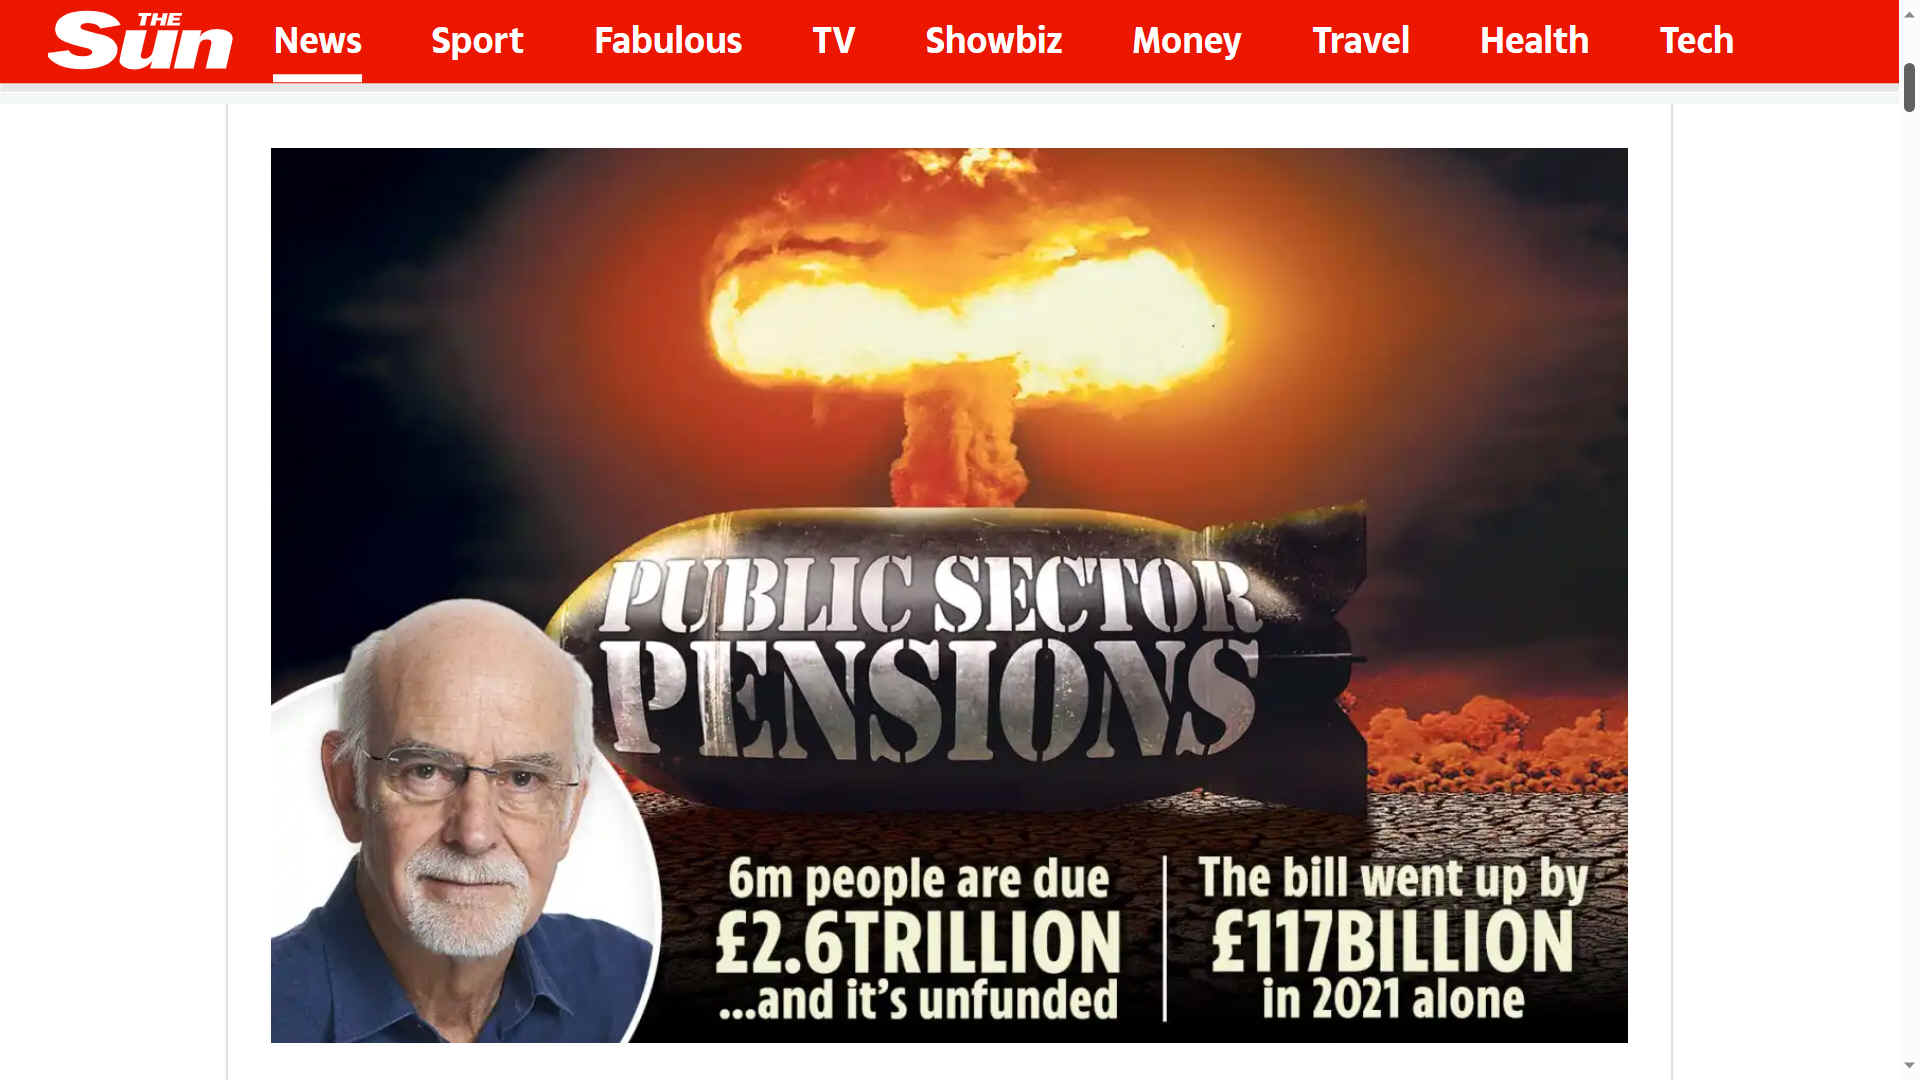 Public sector time bomb, is a Ponzi Scheme fraud perpetuated by the British Government